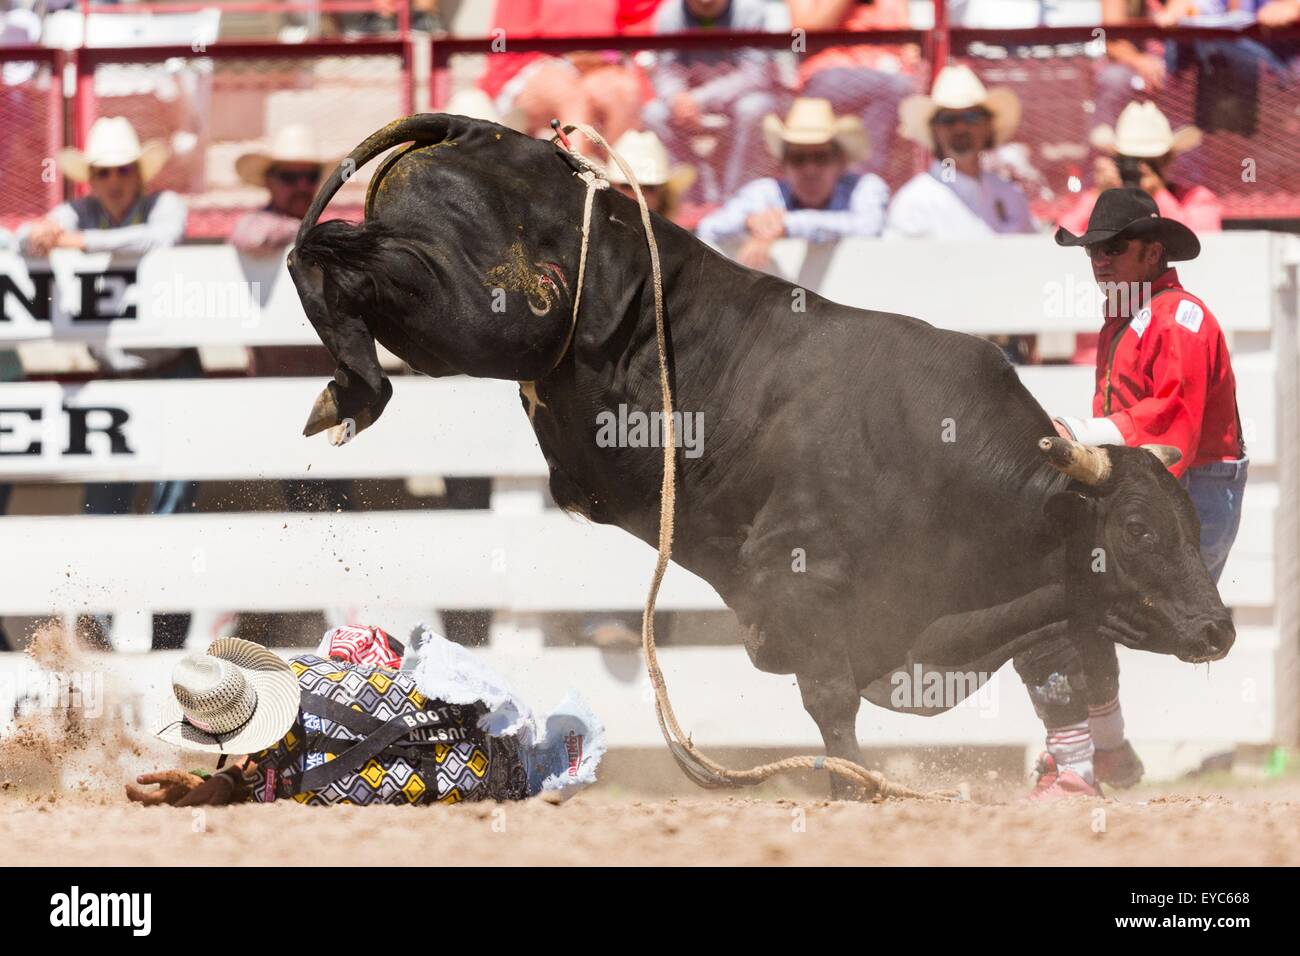 Bullfighter Tuckness is living out his childhood dream, Cheyenne Frontier  Days